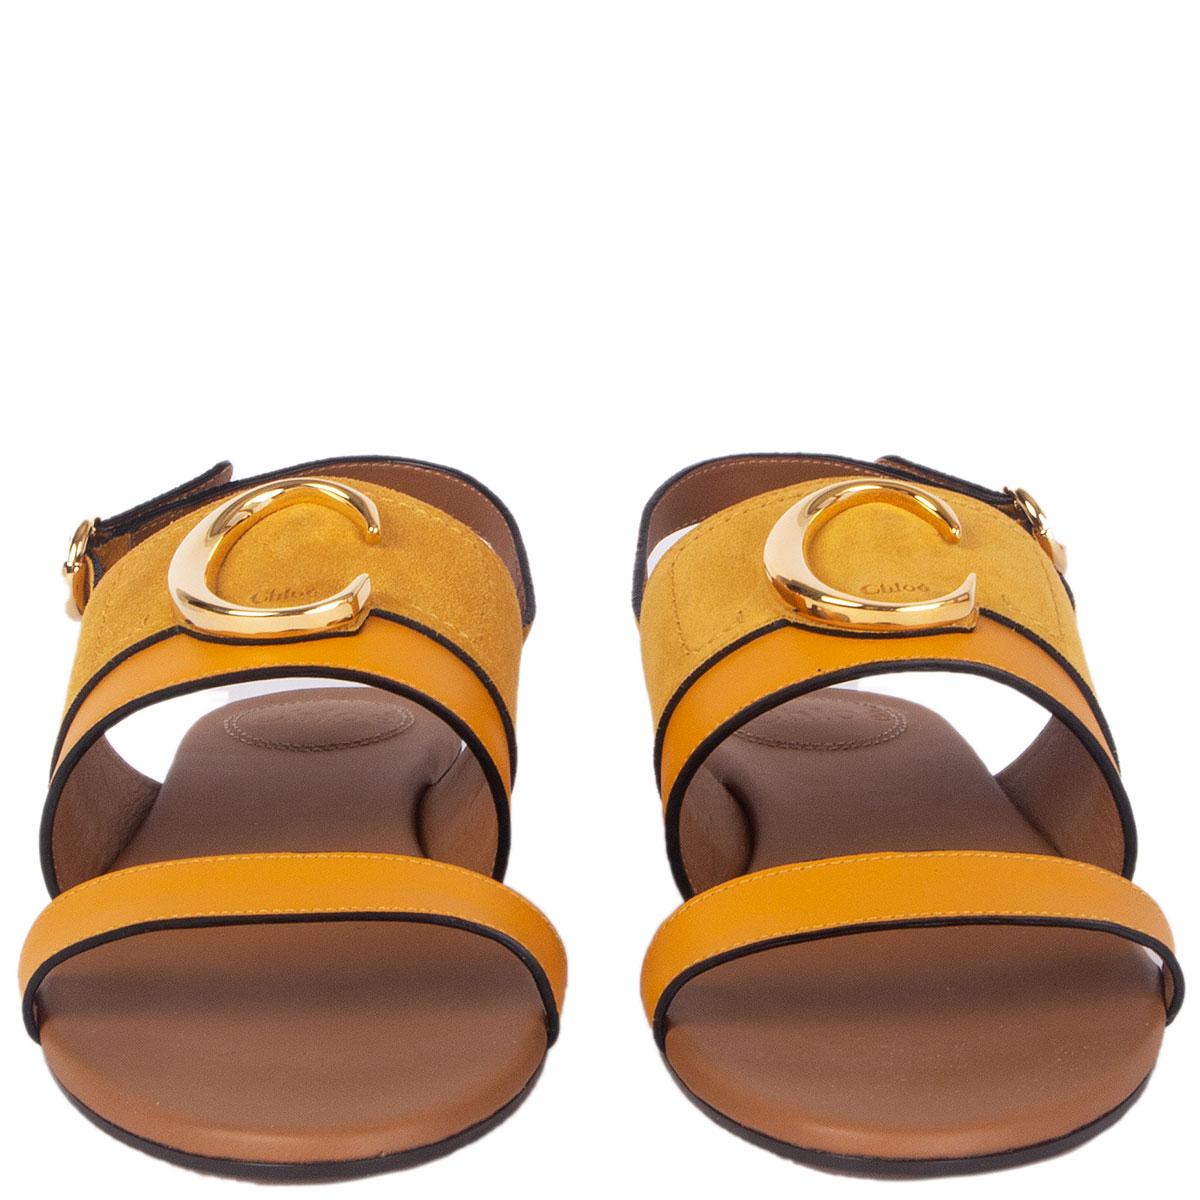 100% authentic Chloé C logo flat sandals in curry yellow suede and leather featuring gold-tone metal embellishment. Closes with a buckle on the side. Brand new. Come with dust bag. 

Imprinted Size	37.5
Shoe Size	37.5
Inside Sole	24cm